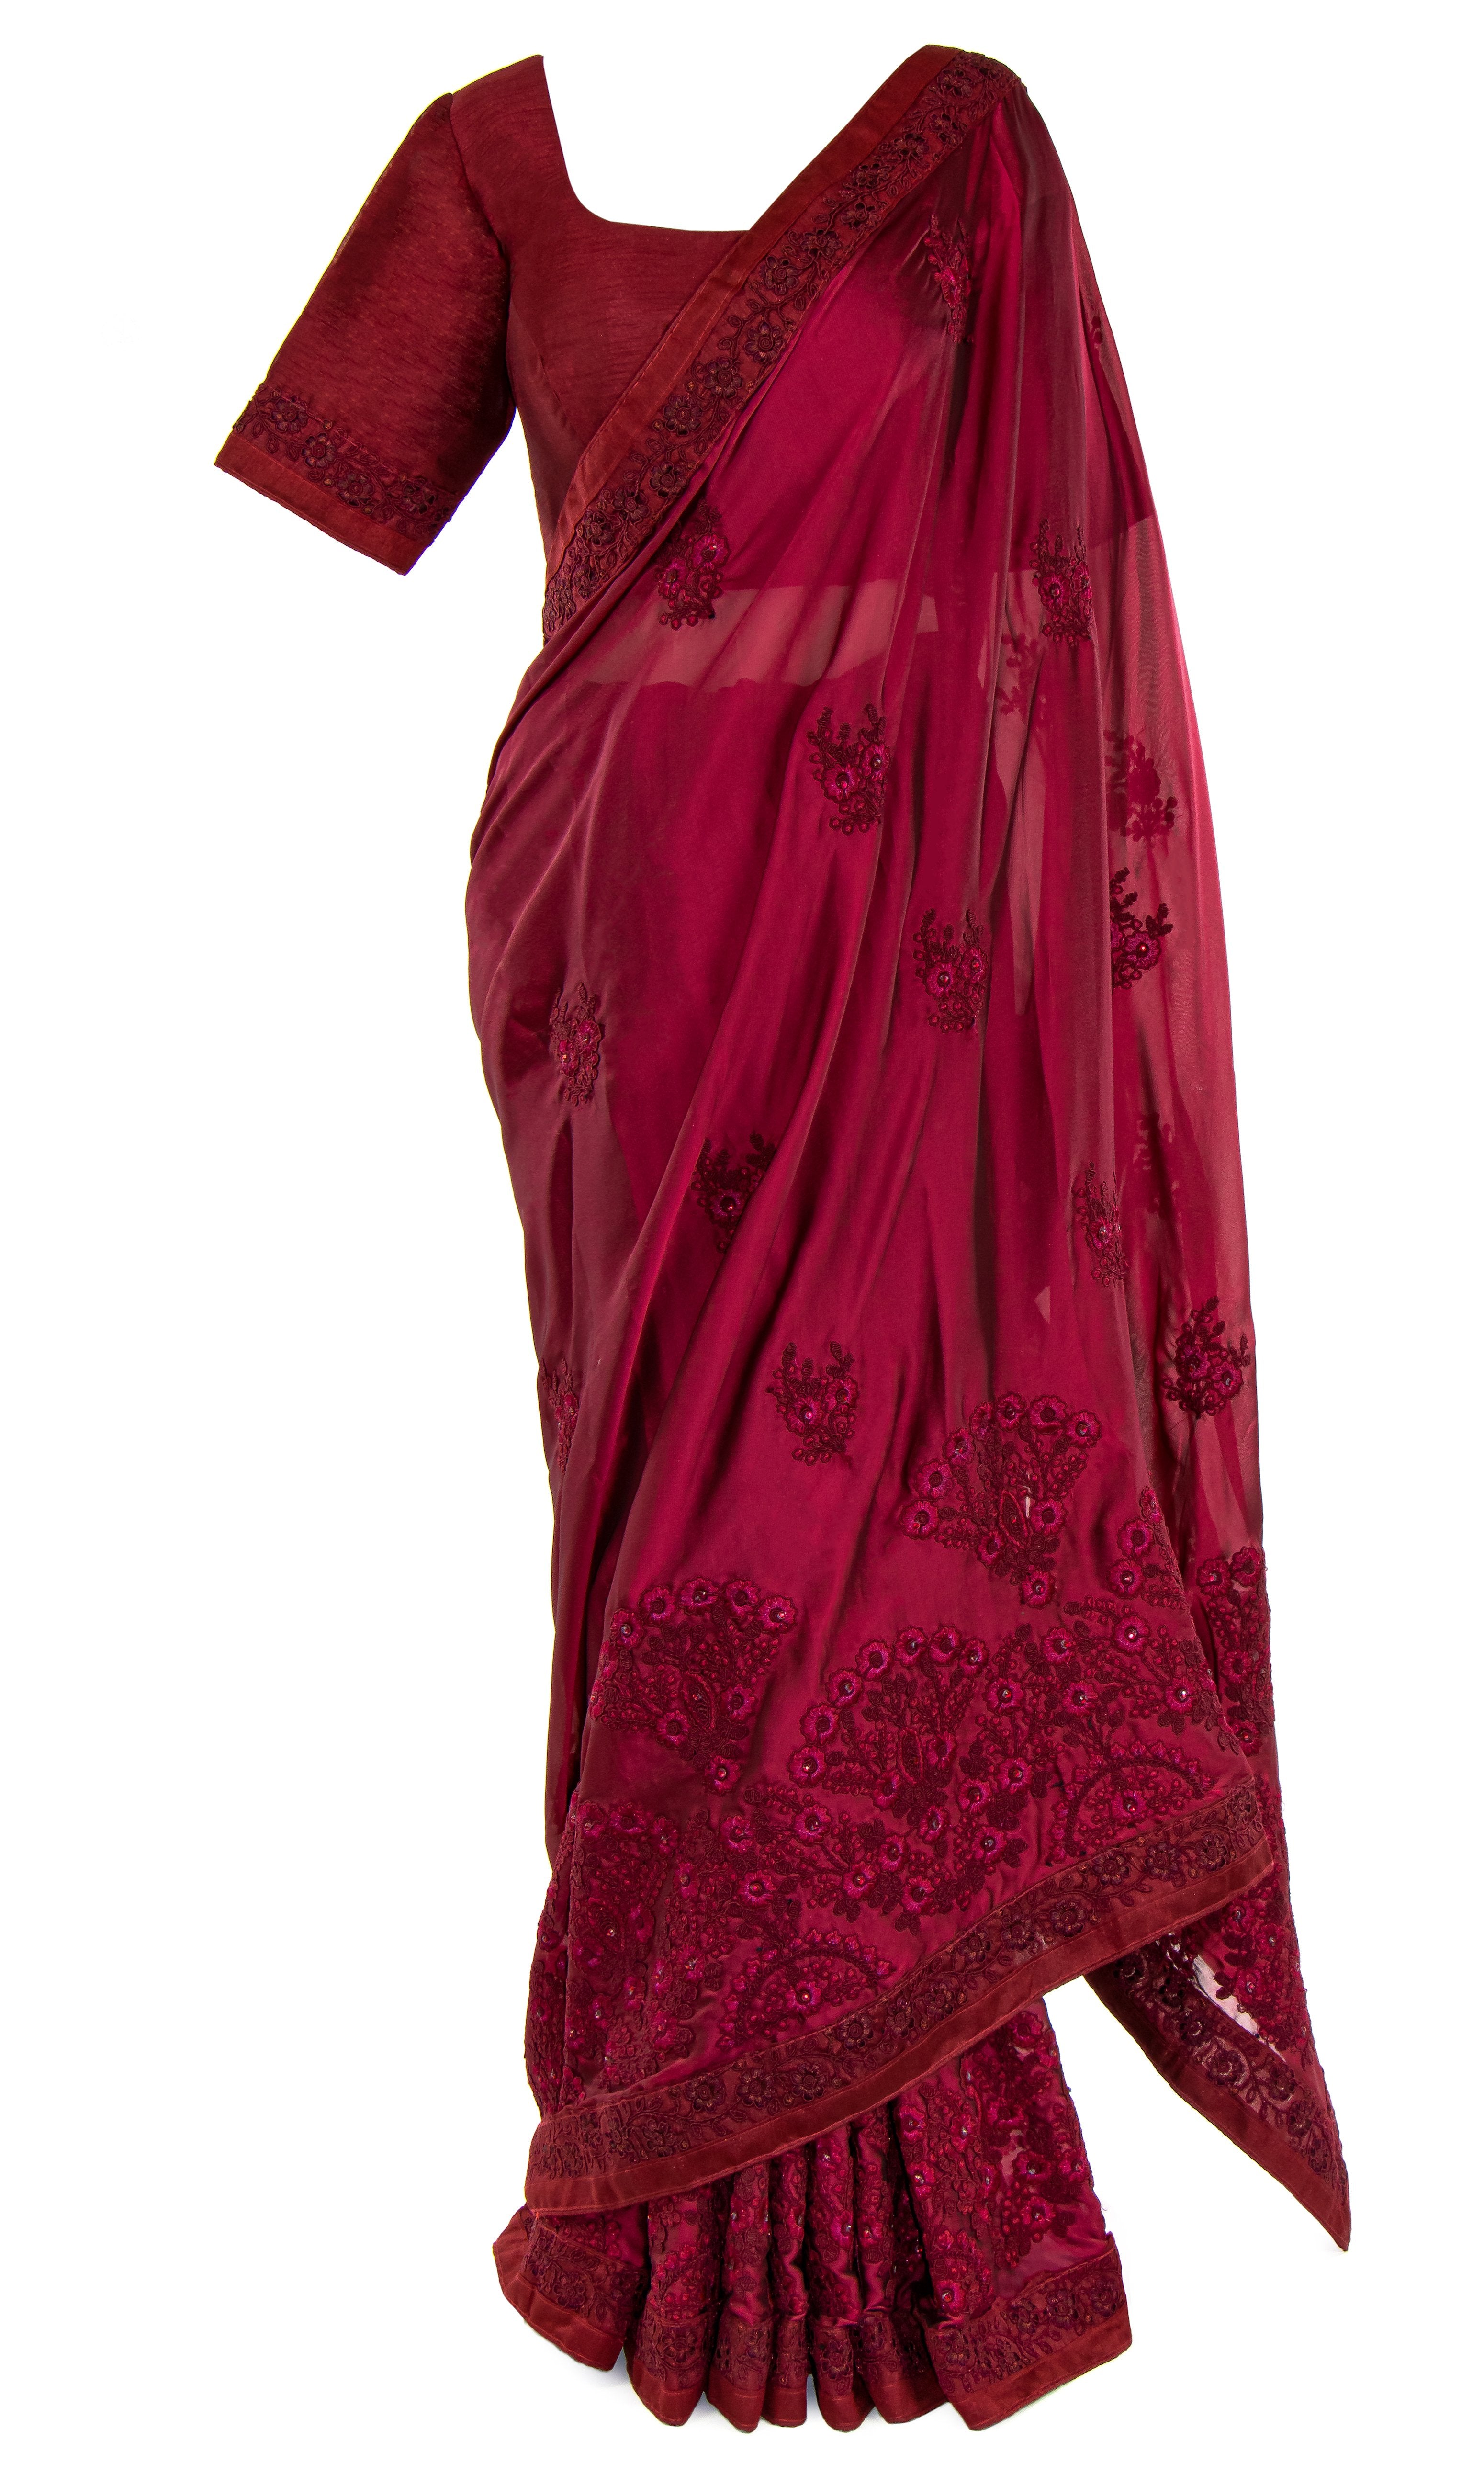 Maroon silk top features beautiful floral embroidered cuffs. It’s paired with an elegant matching Saree.